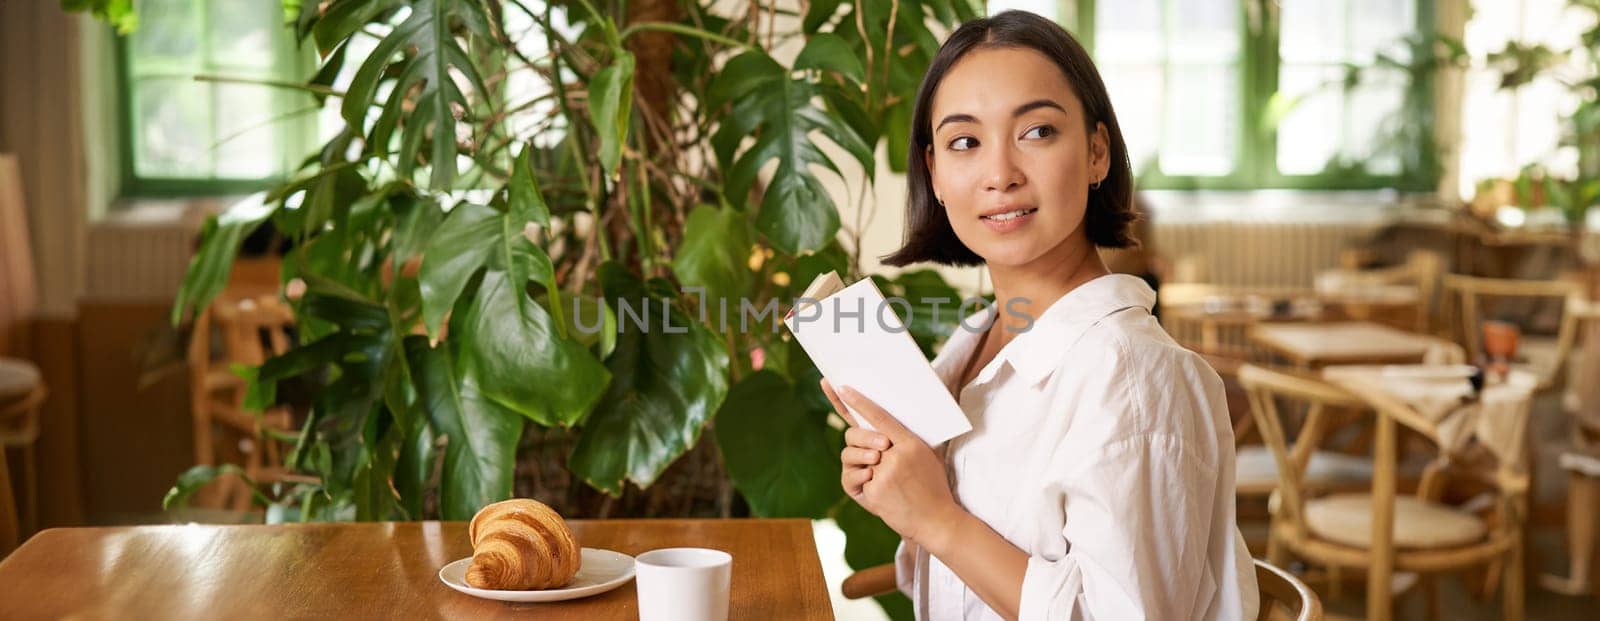 Beautiful young asian woman with a book in hands, sitting in cafe, drinking coffee and eating croissant, smiling, looking mysterious.